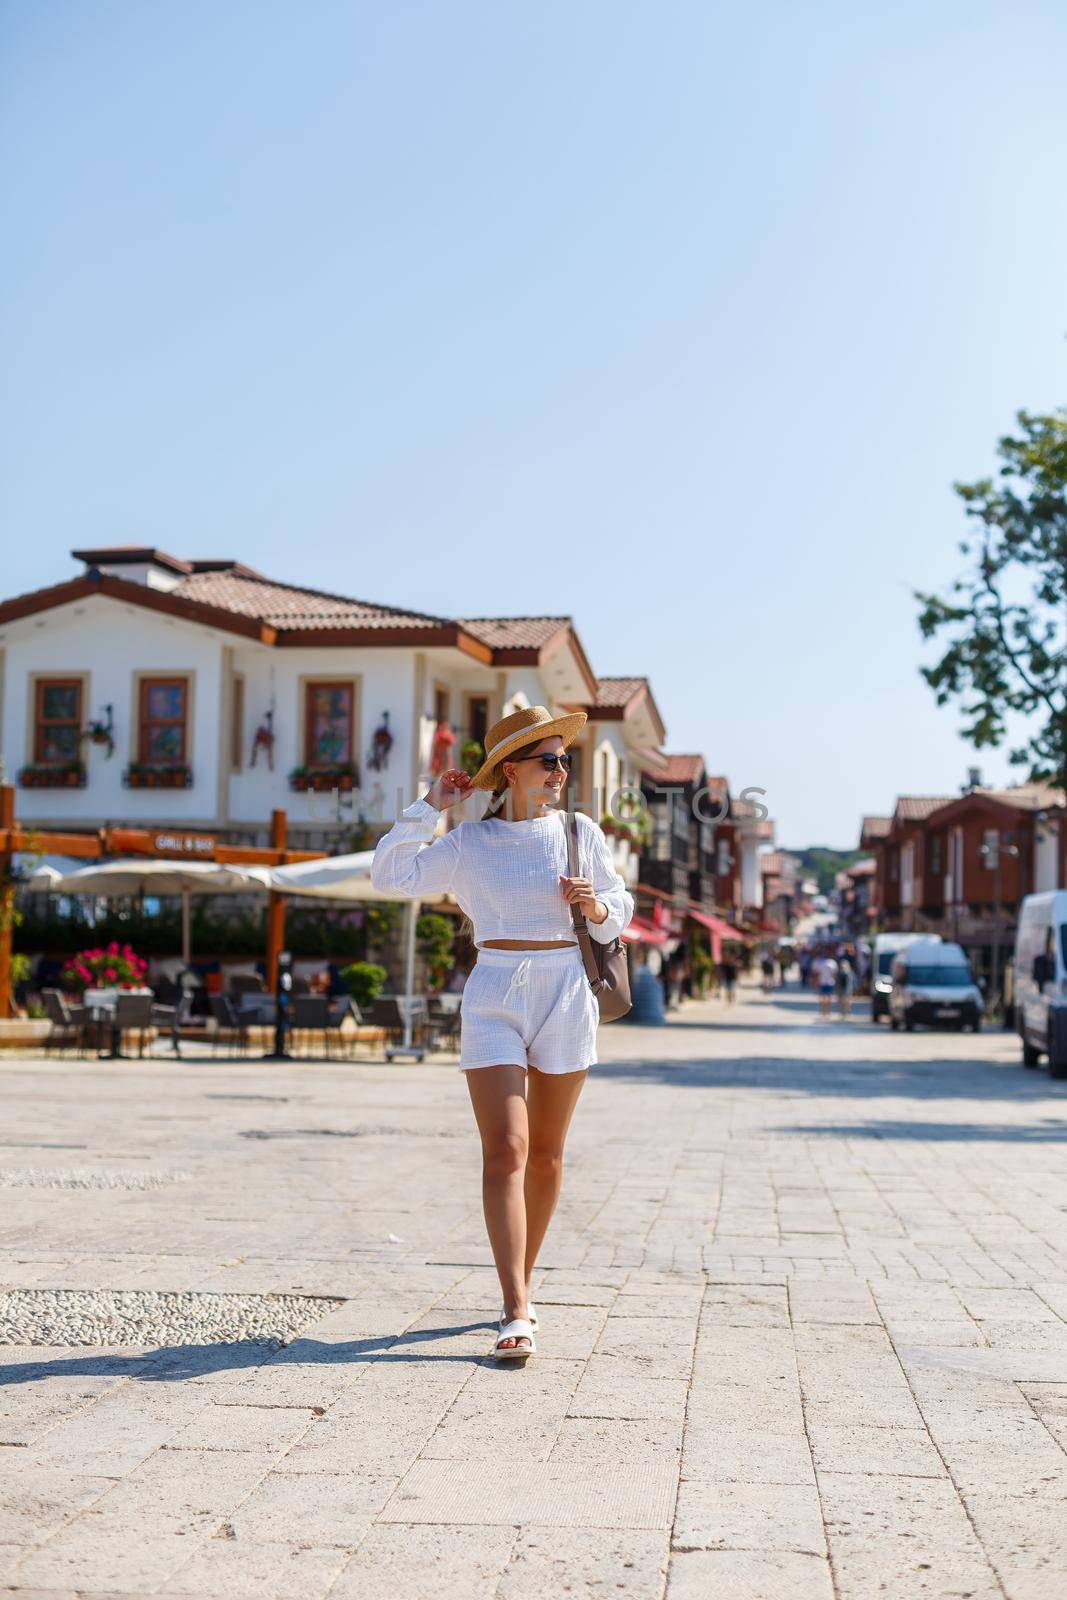 A young slender tanned woman in white shorts and a T-shirt, wearing sunglasses and a hat. Walk on a hot sunny day in the ancient city by Dmitrytph